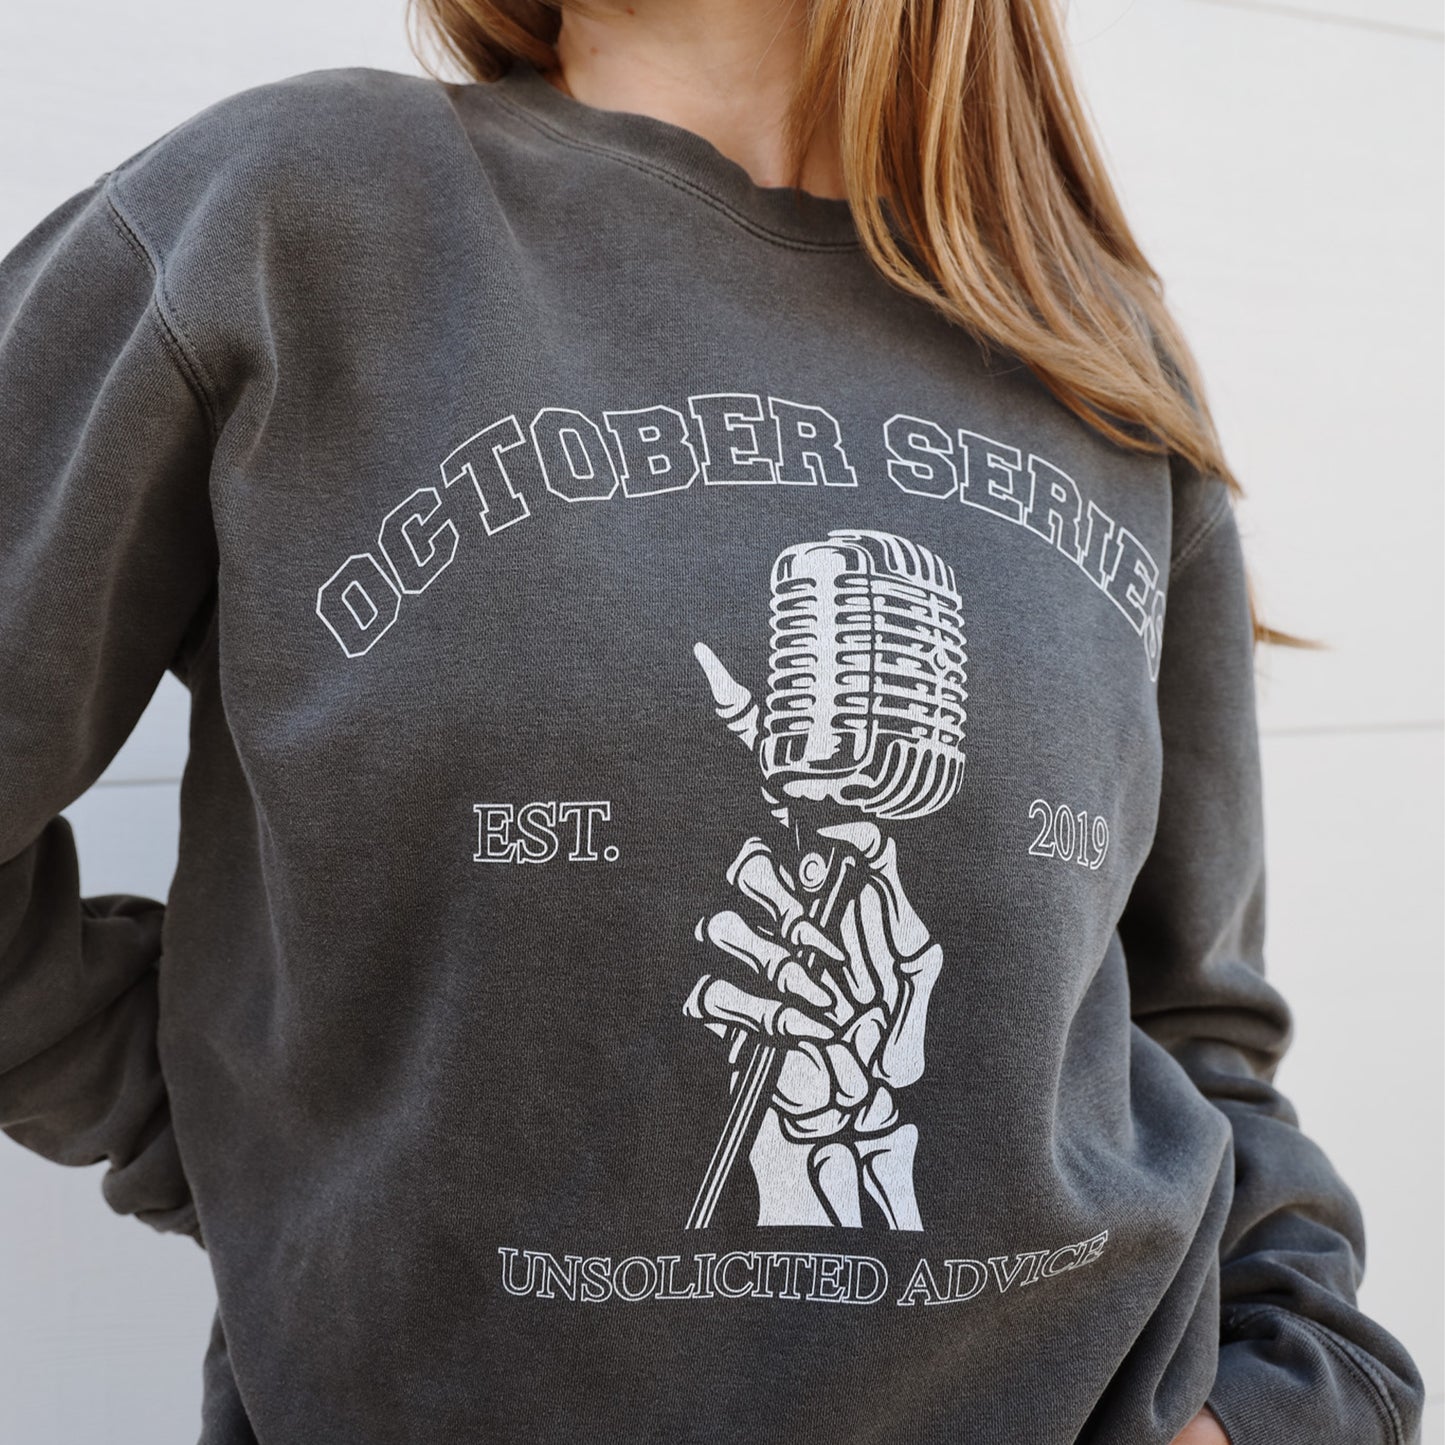 Unsolicited Advice: October Series Crewneck